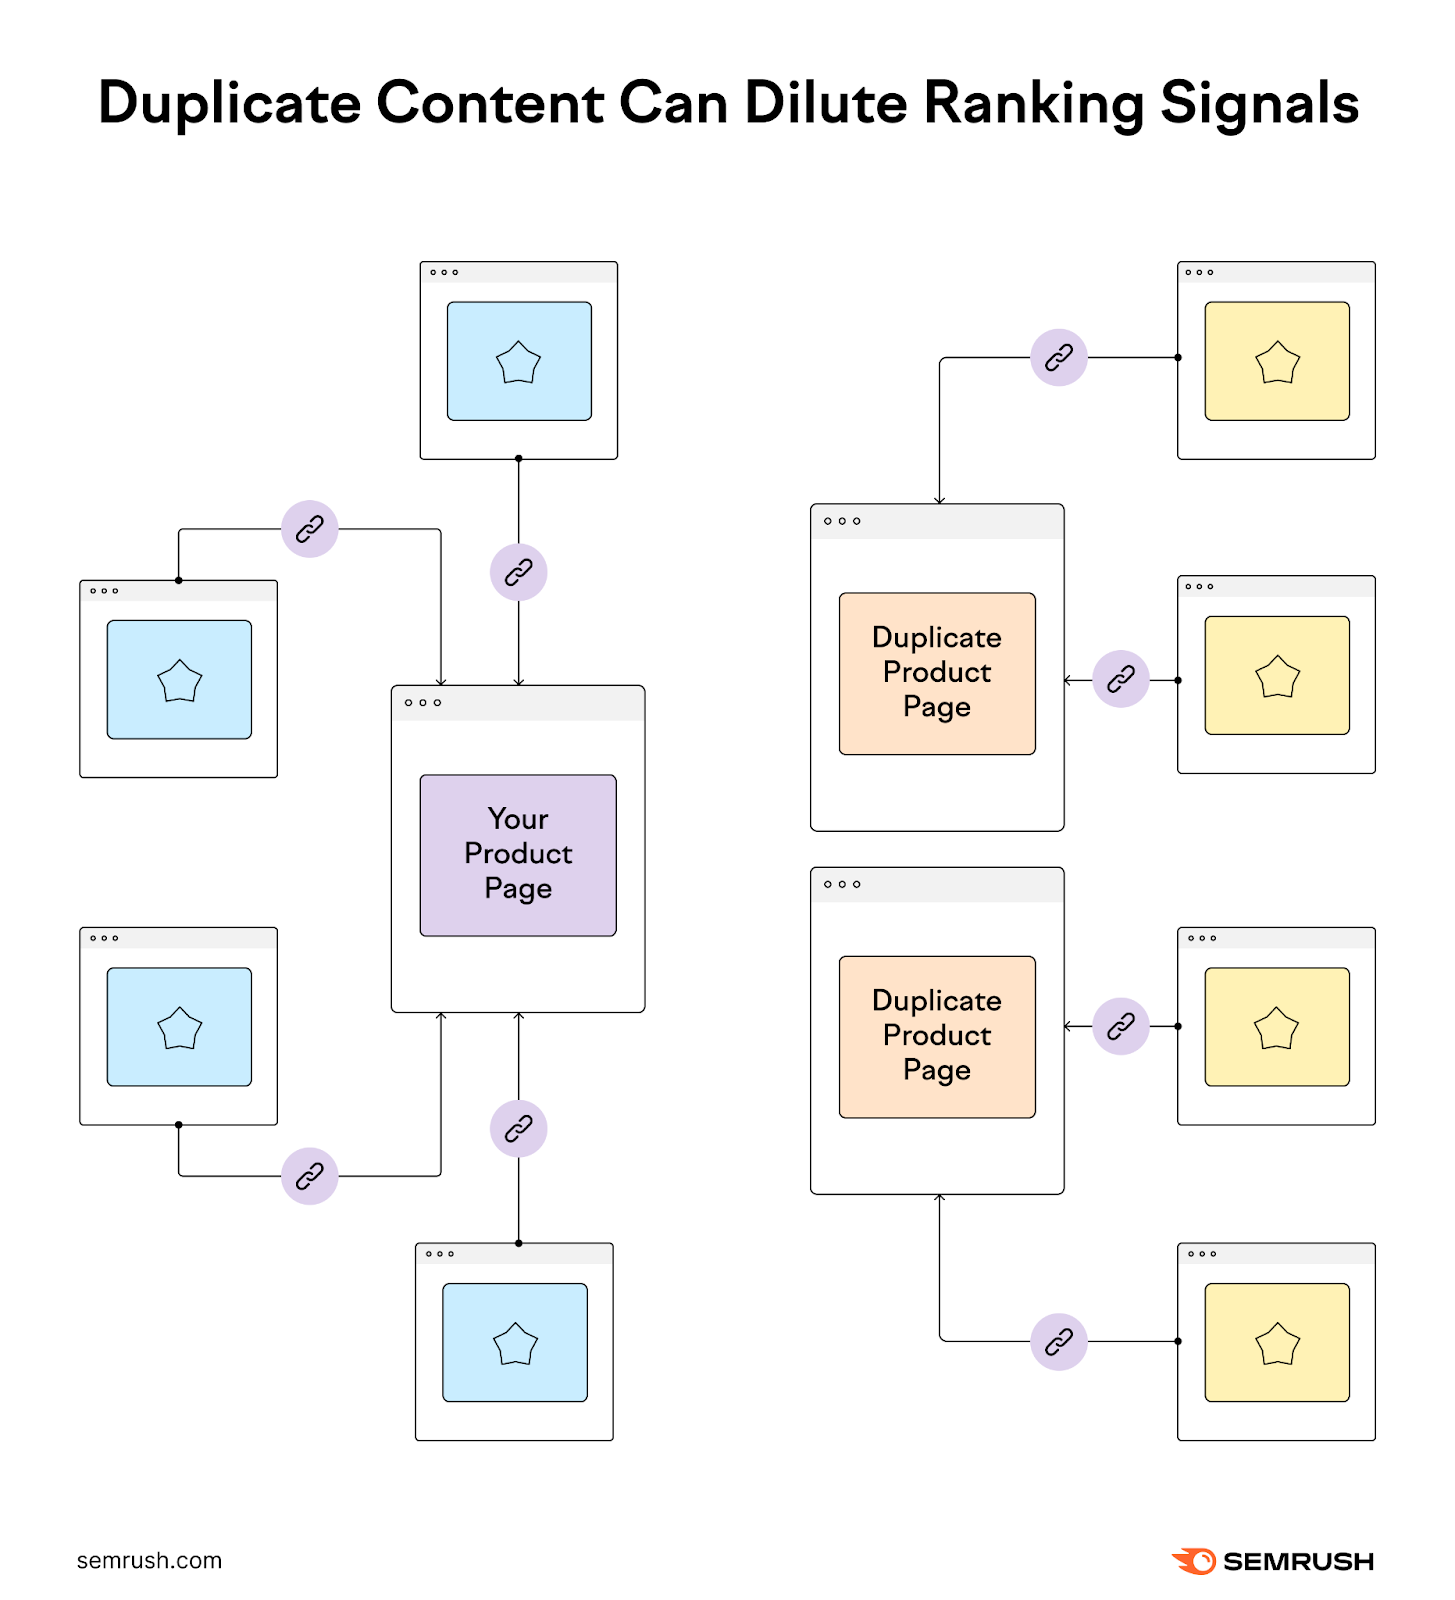 How duplicate content can dilute ranking signals